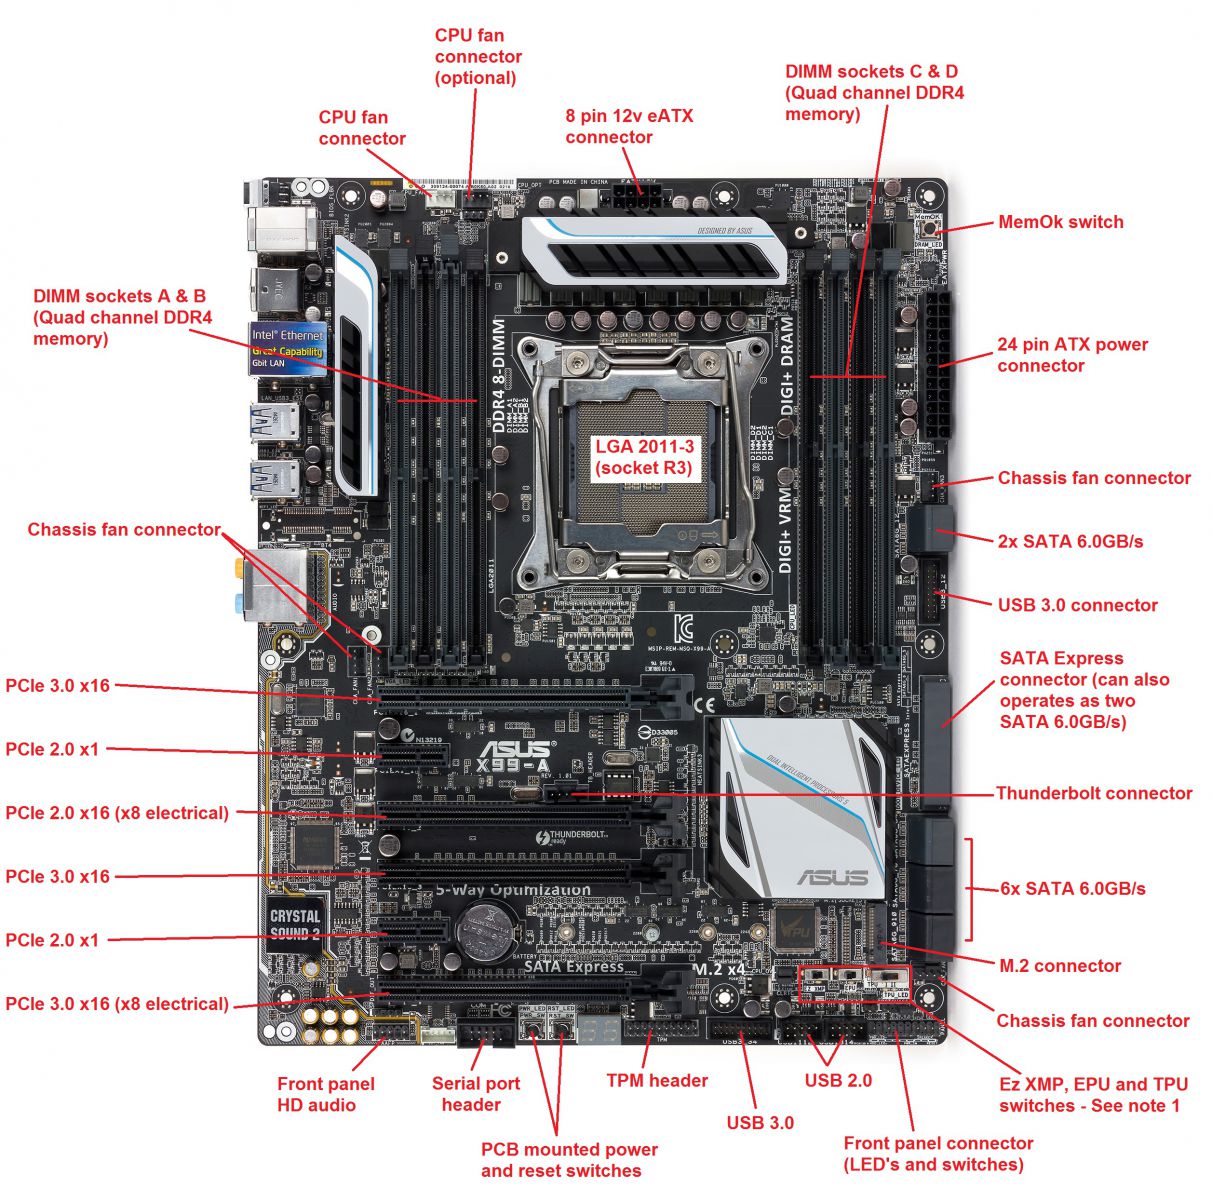 BOAMOT-477 - Stone / Asus X99-A - Motherboard Specification, Layout and ...